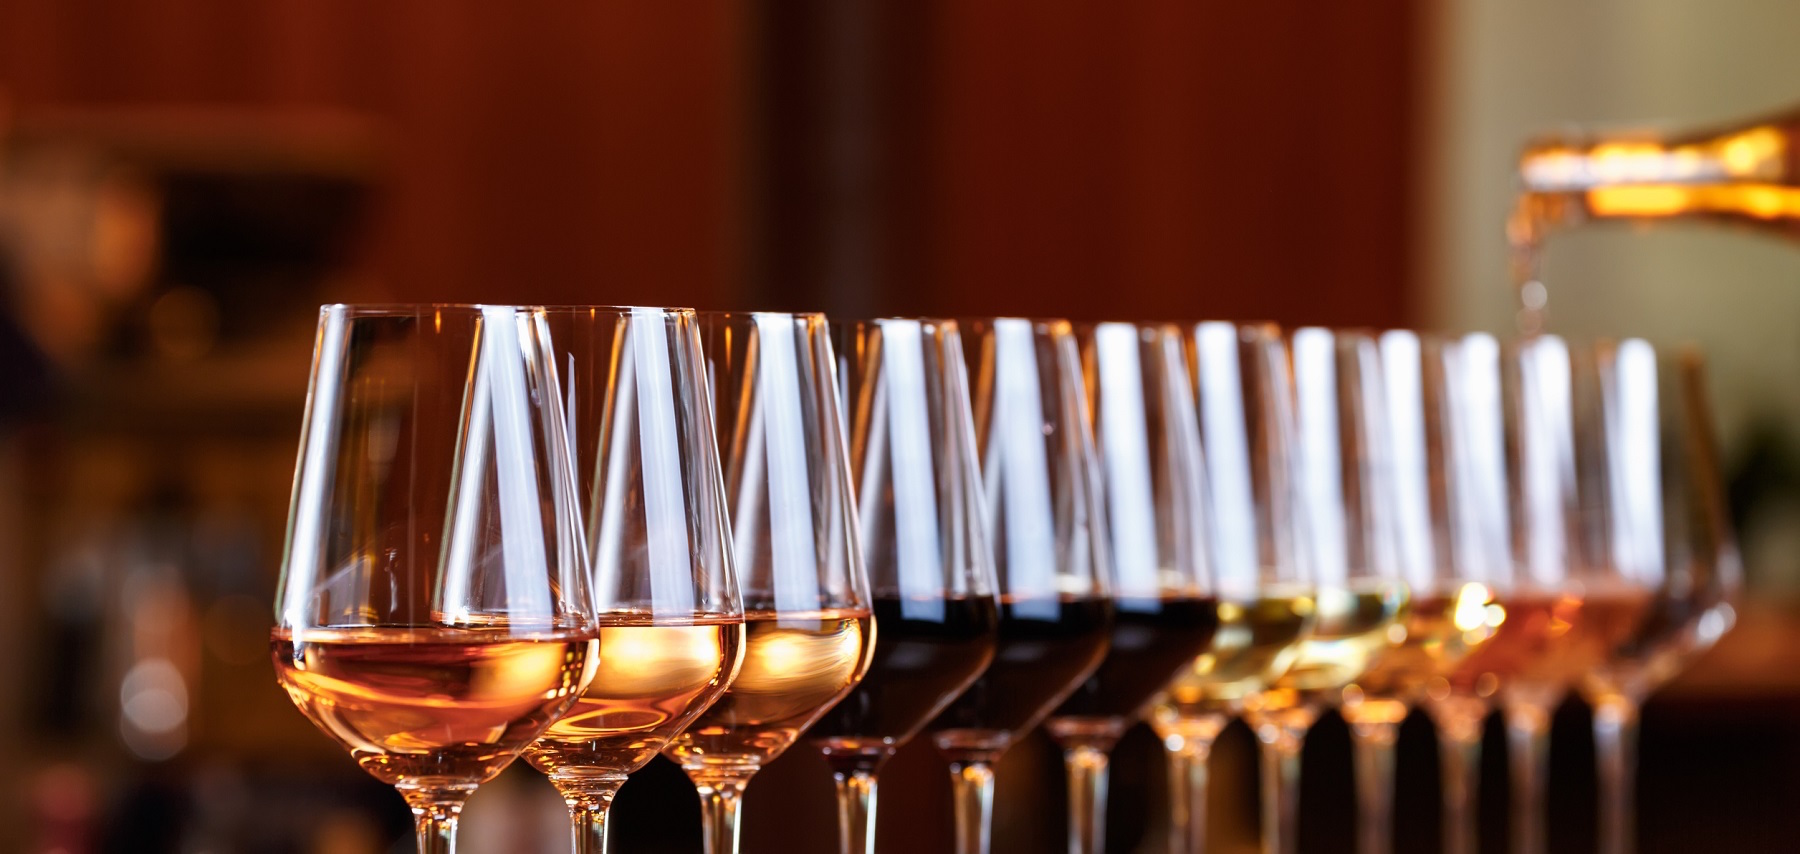 Wine glasses in a row. Pouring wine. Buffet table celebration of wine tasting. Nightlife, celebration and entertainment concept. Horizontal, wide screen banner format (Wine glasses in a row. Pouring wine. Buffet table celebration of wine tasting. Nigh